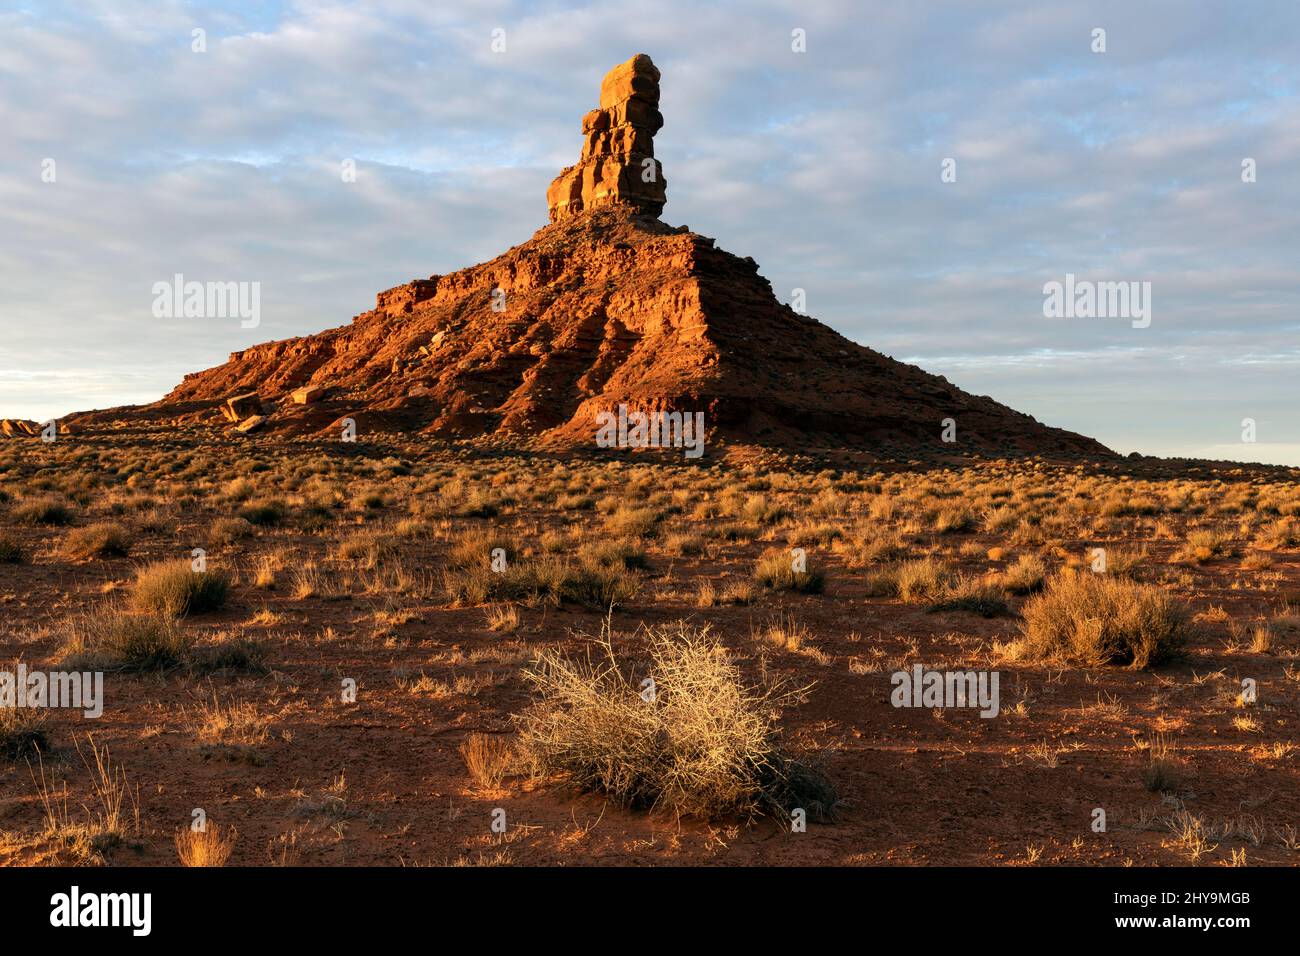 UT00906-00.....UTAH - Rooster Butte at sunrise in the Valley Of The Gods, Bears Ears National Monument. Stock Photo